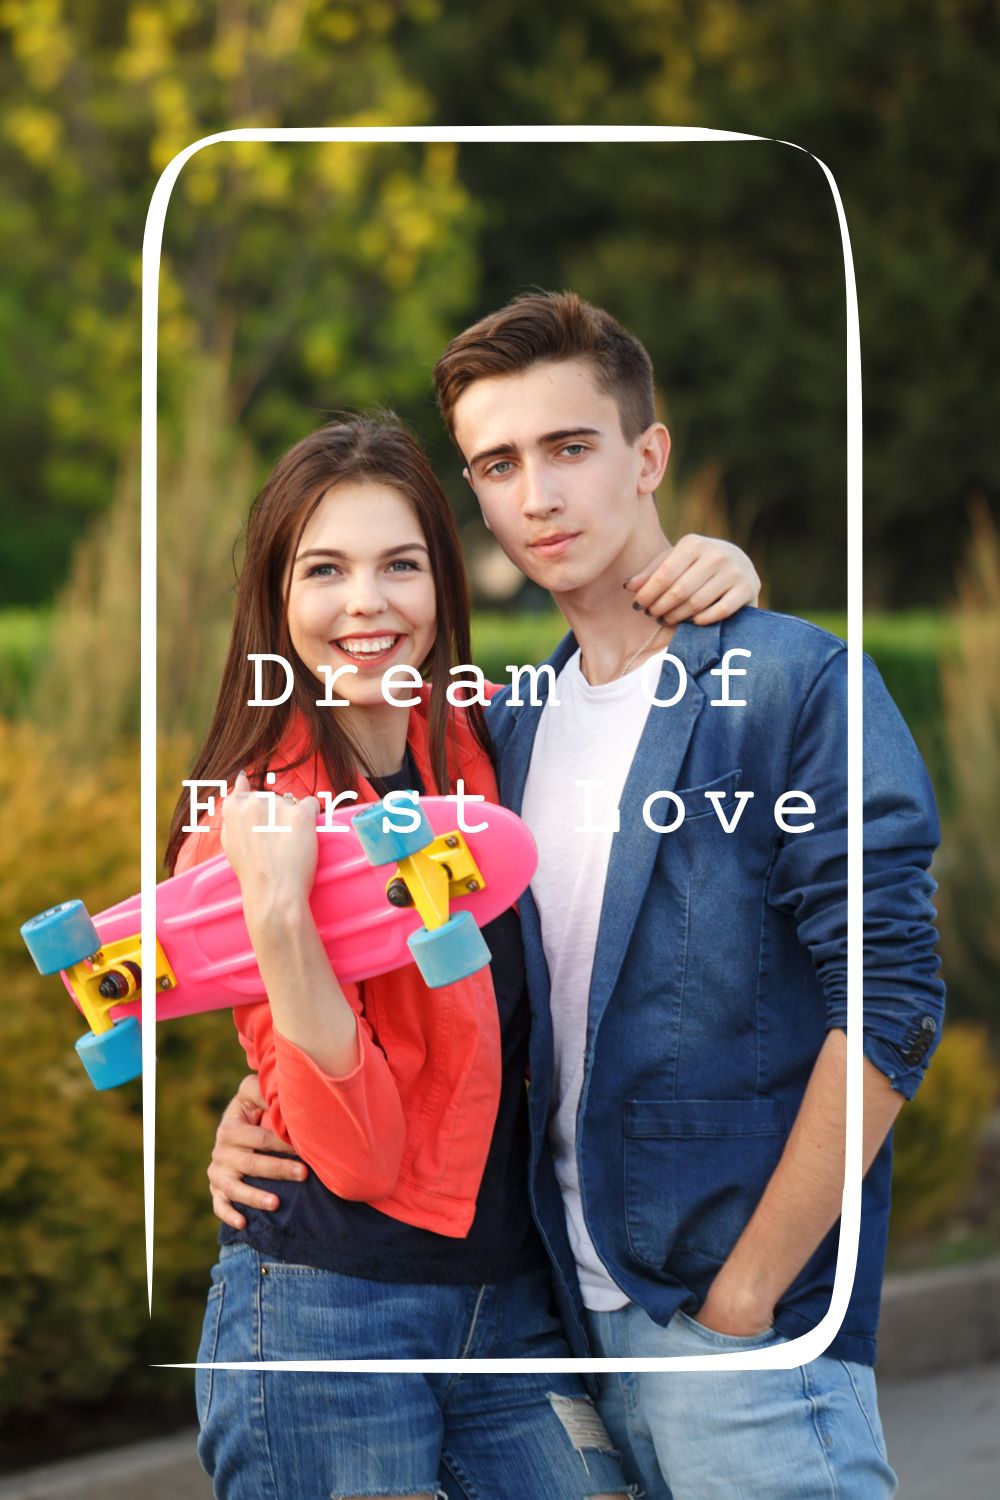 Dream Of First Love Meanings 1